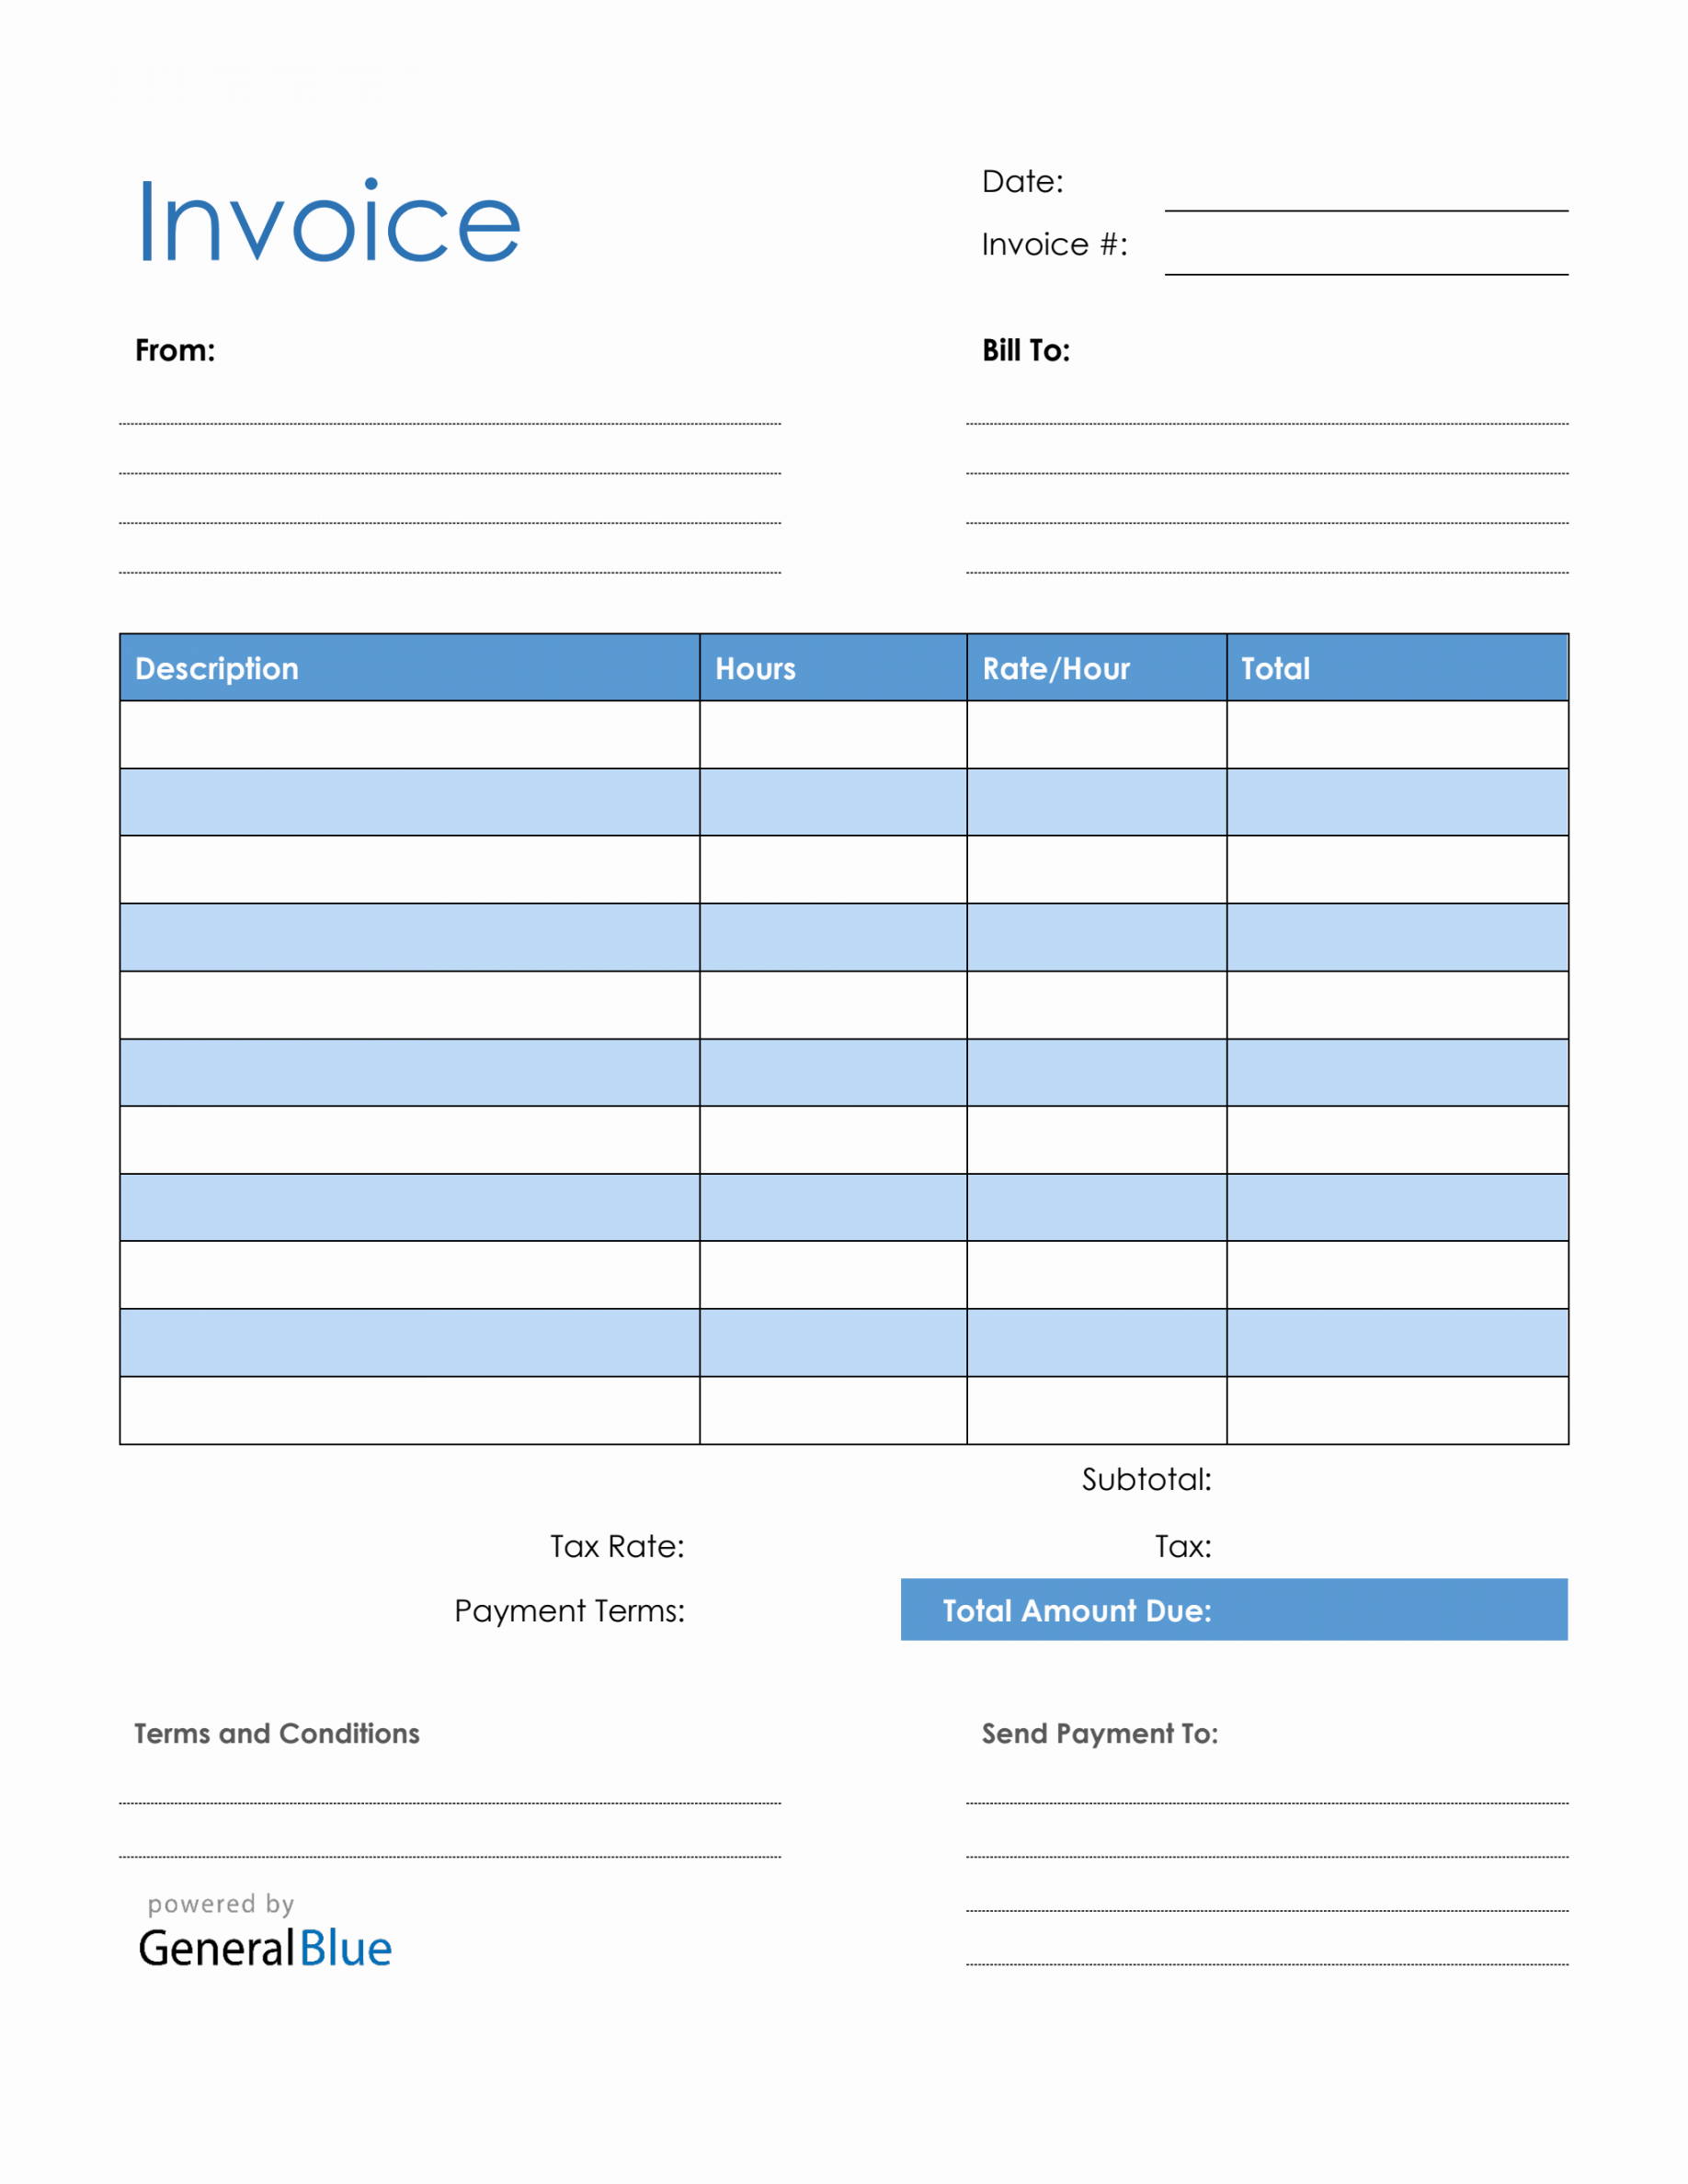 Invoice Templates Printable Free - Printable - Blank Invoice Template in PDF Blue